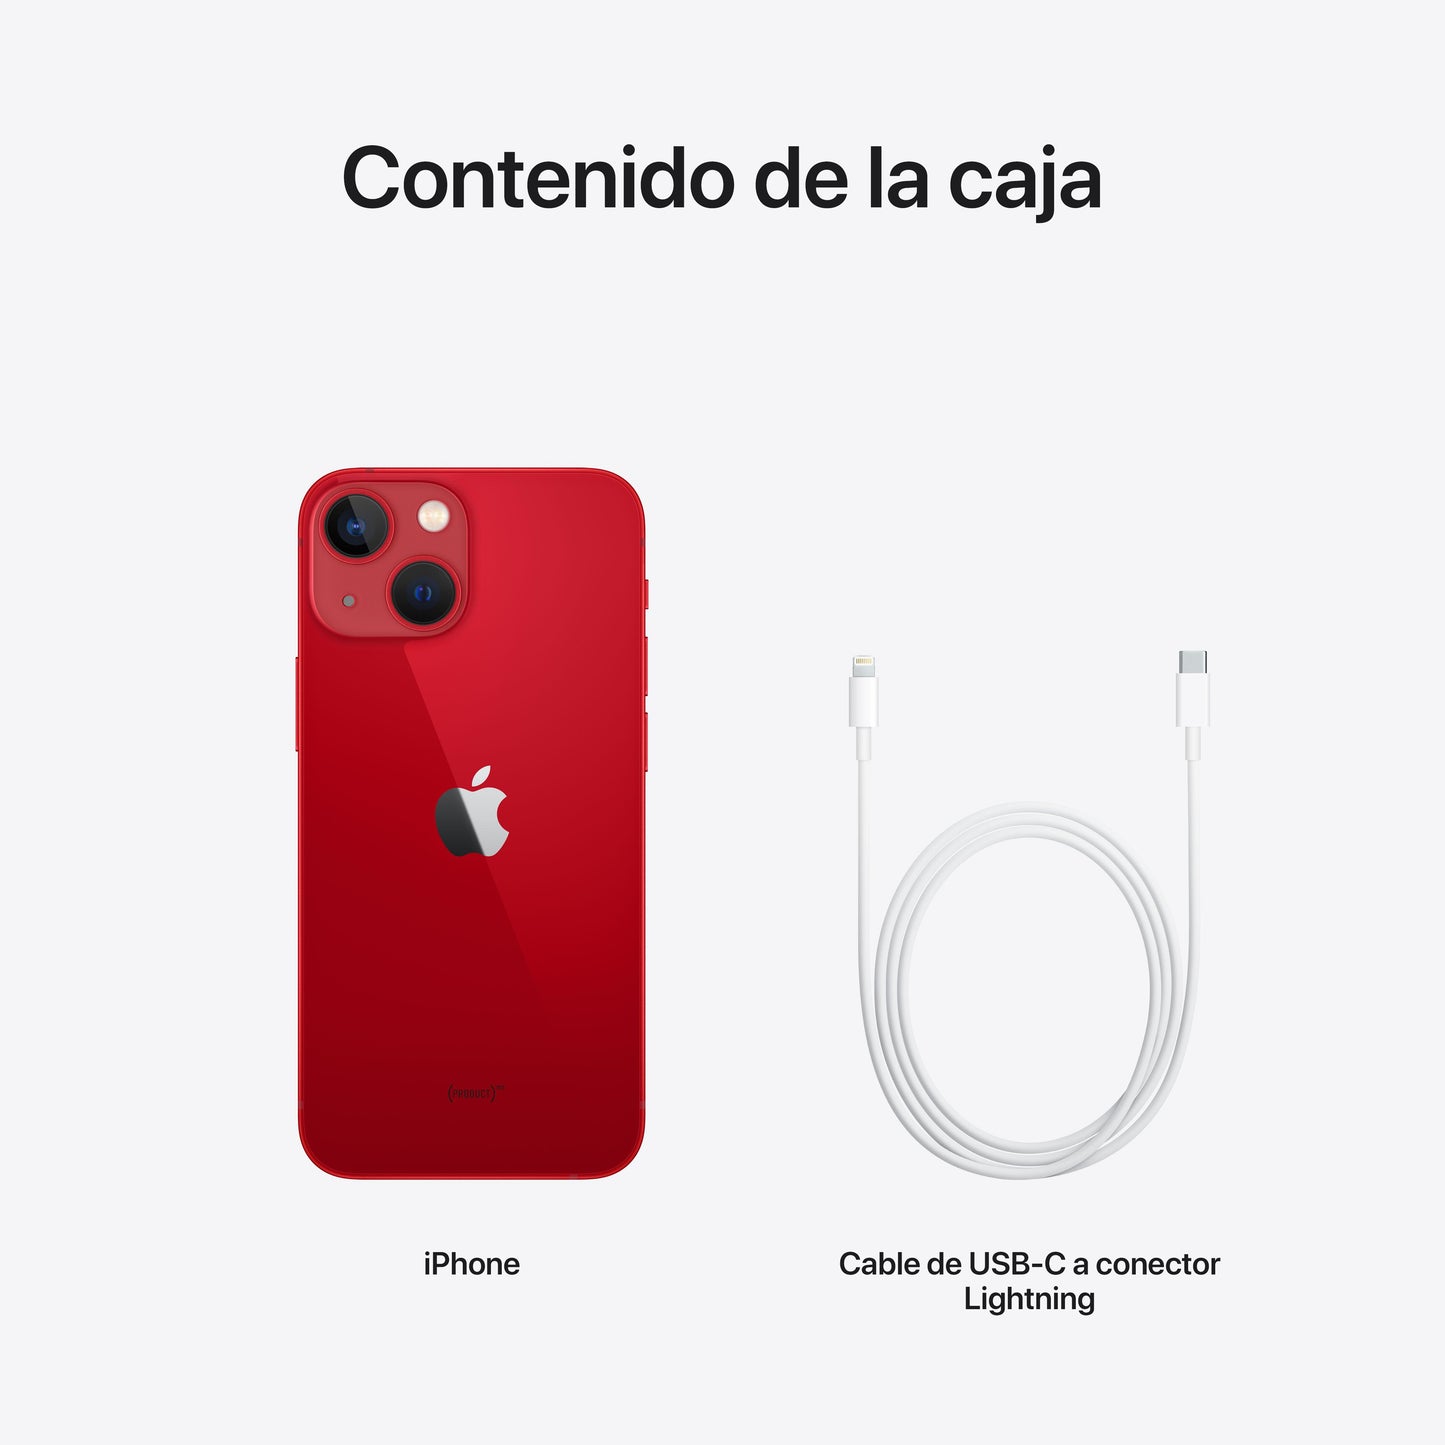 iPhone 13 mini 128 GB (PRODUCT)RED - Rossellimac